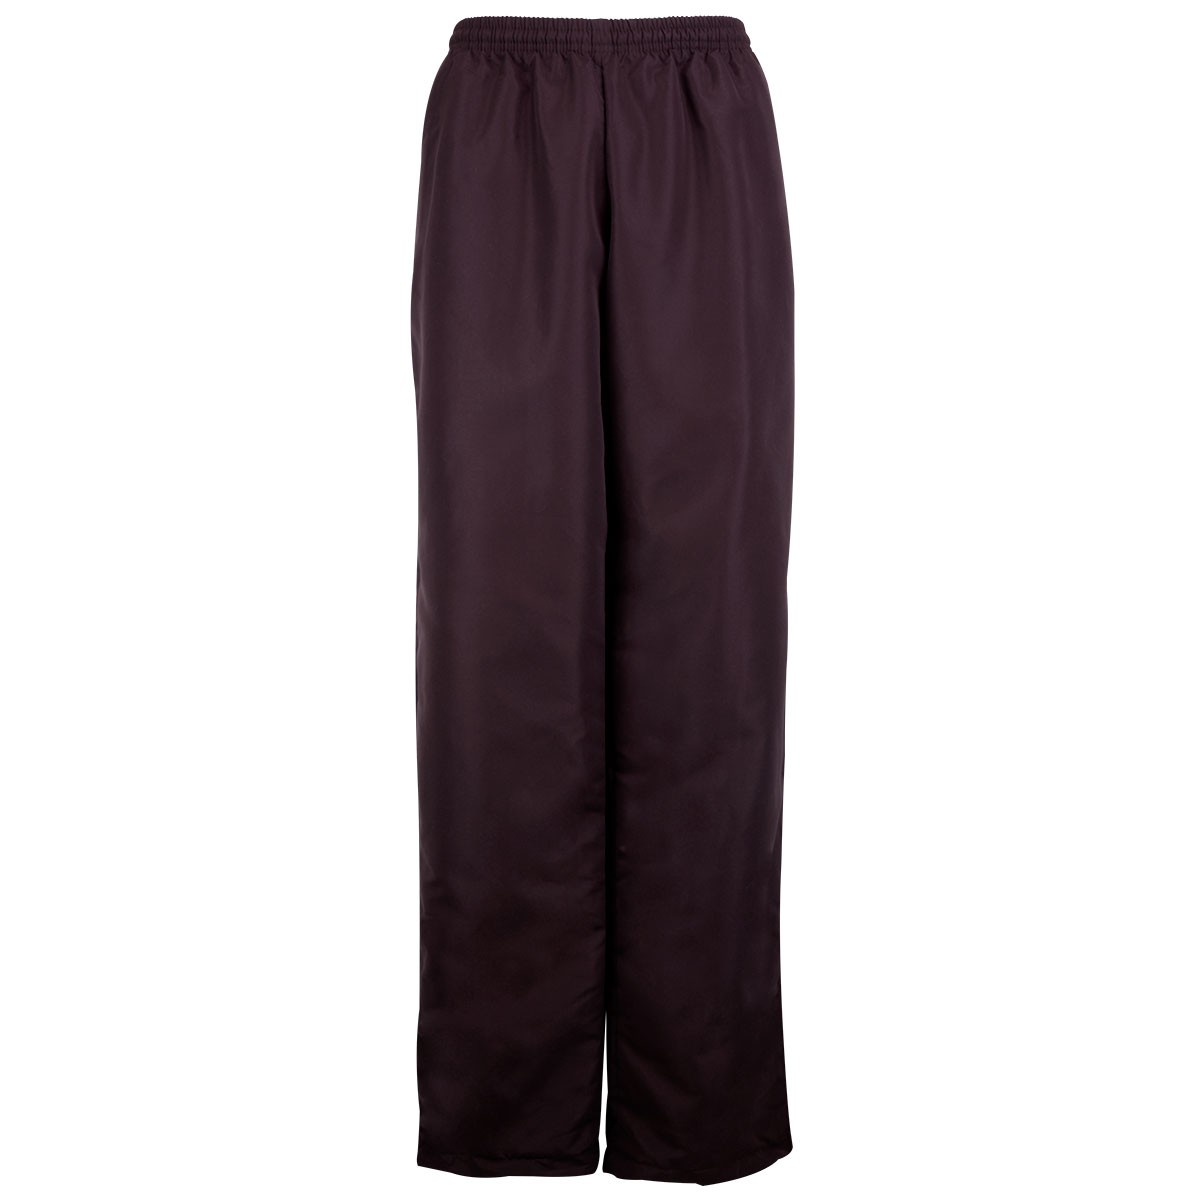 Uncommon Threads Unisex Classic Baggy Chef Pant with 3 Inch Elastic Waist 